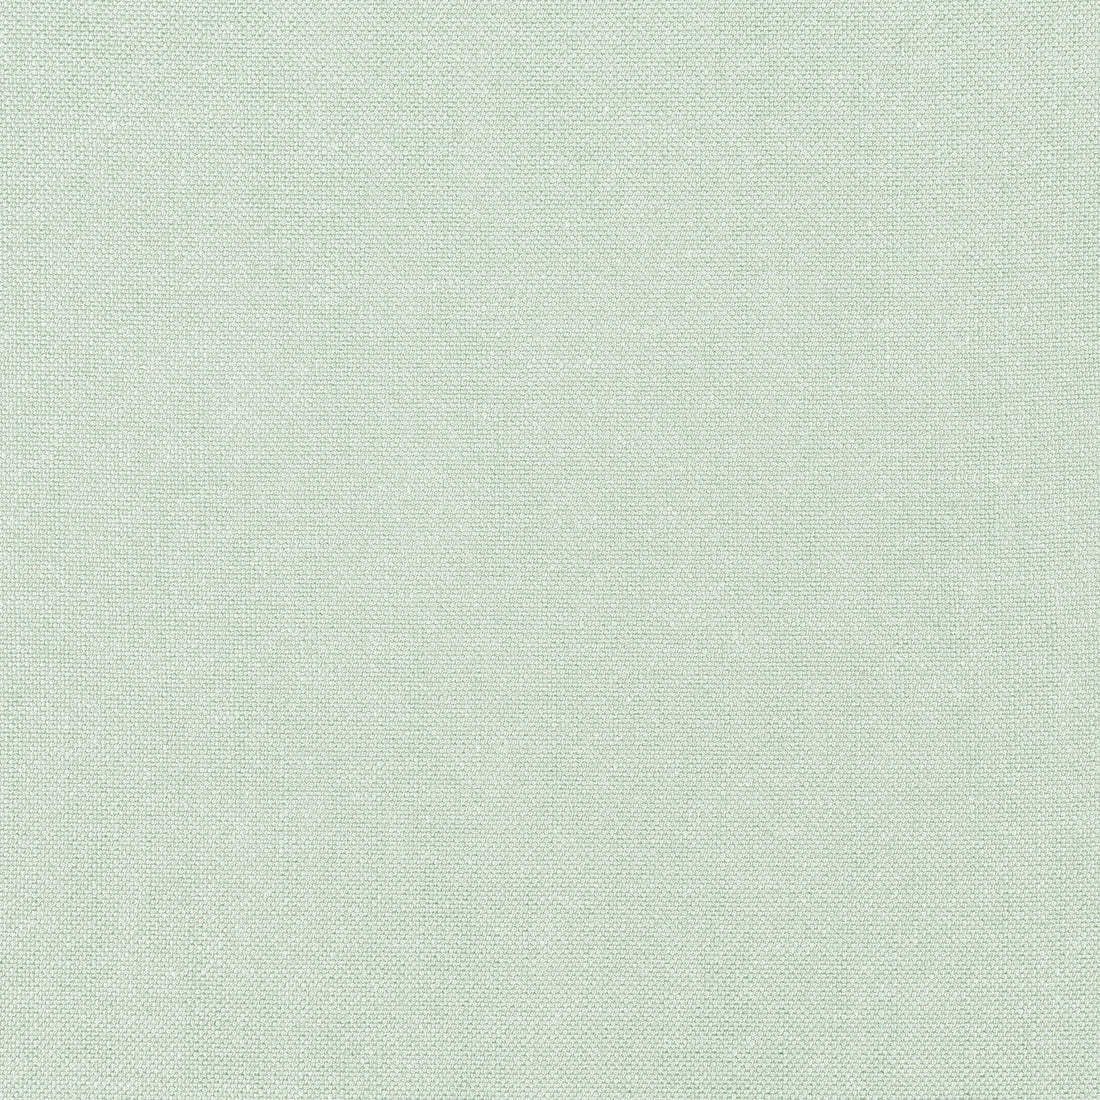 Palisade Linen fabric in seafoam color - pattern number FWW7650 - by Thibaut in the Palisades collection